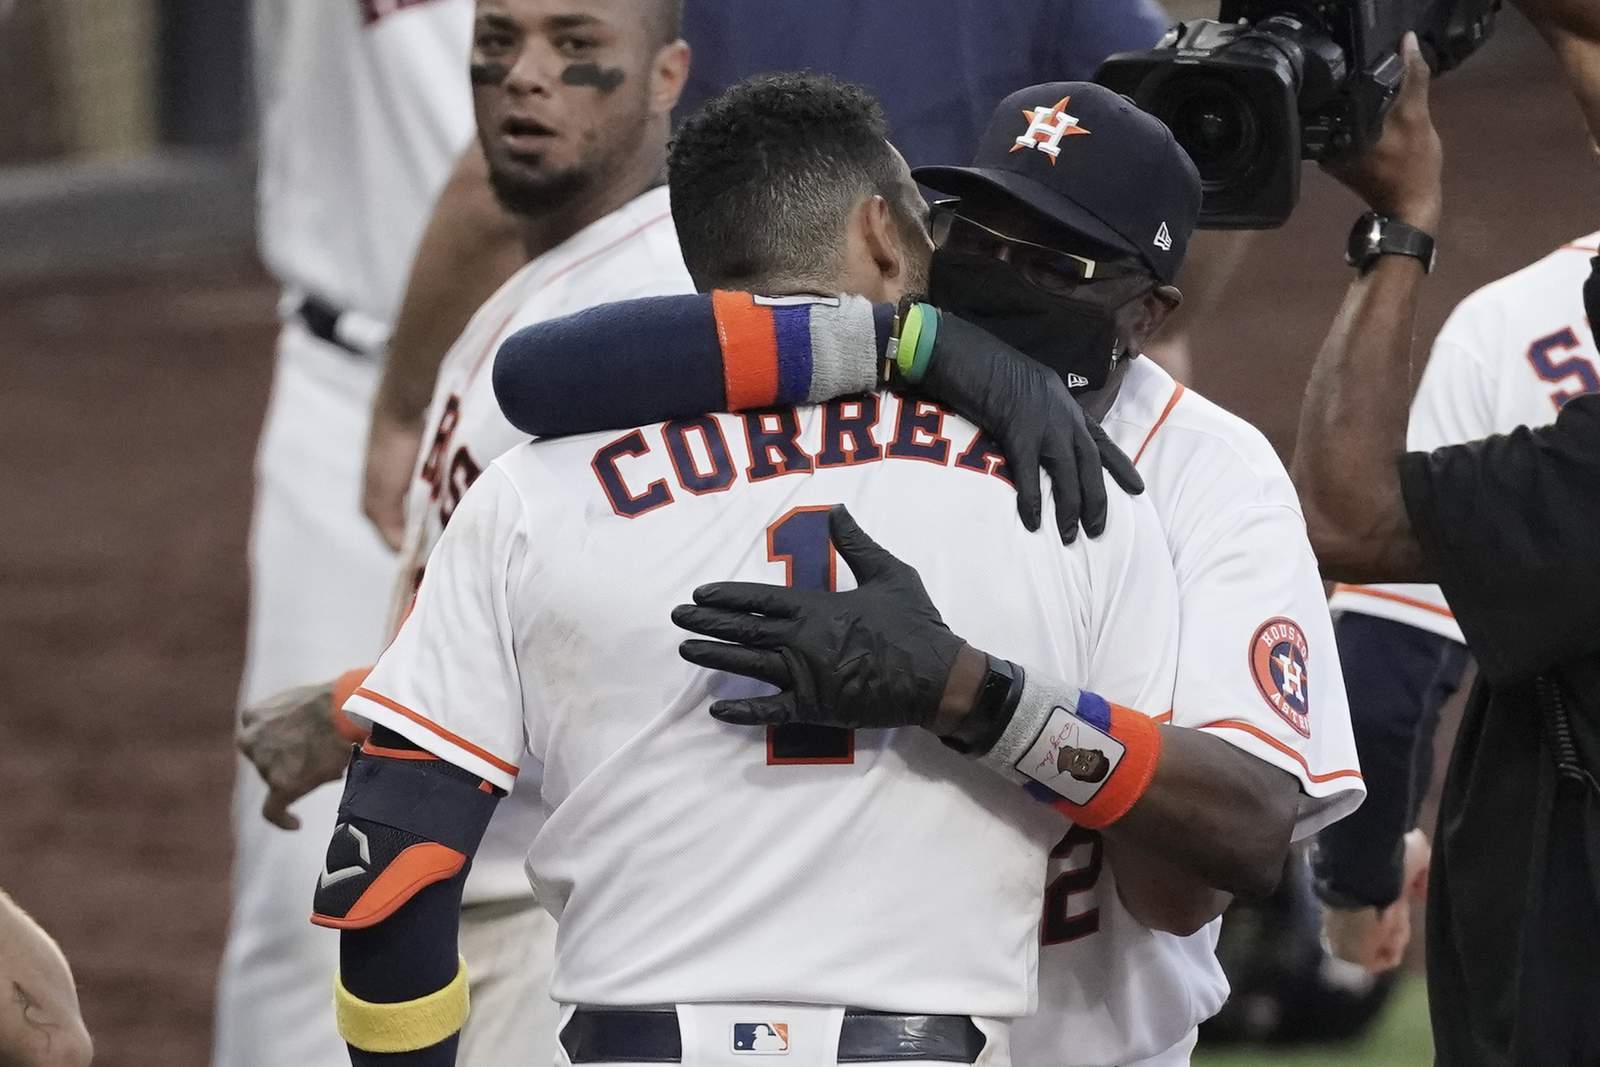 Correa's time: Late HR helps Astros top Bosox in ALCS opener